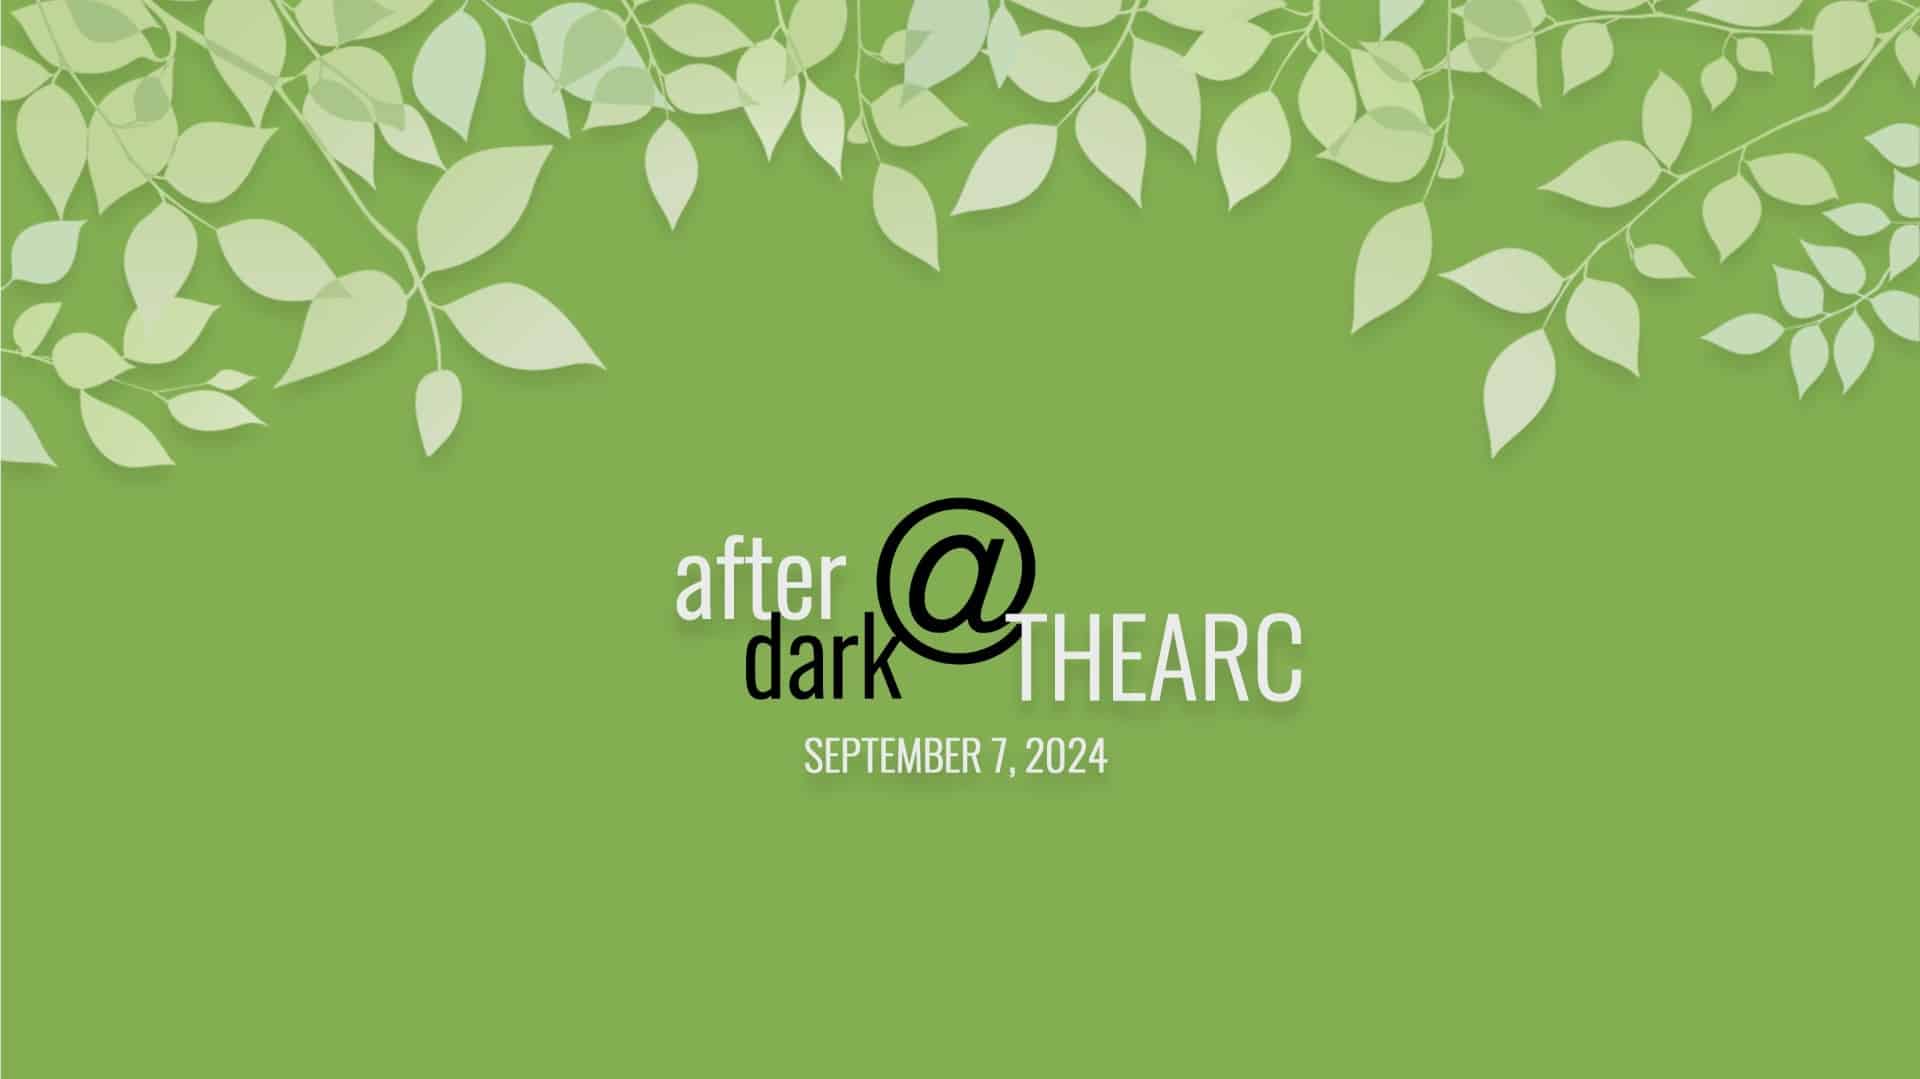 Promotional graphic for "after dark @ the arc" event on september 7, 2024, featuring a logo with leafy branches on a green background.